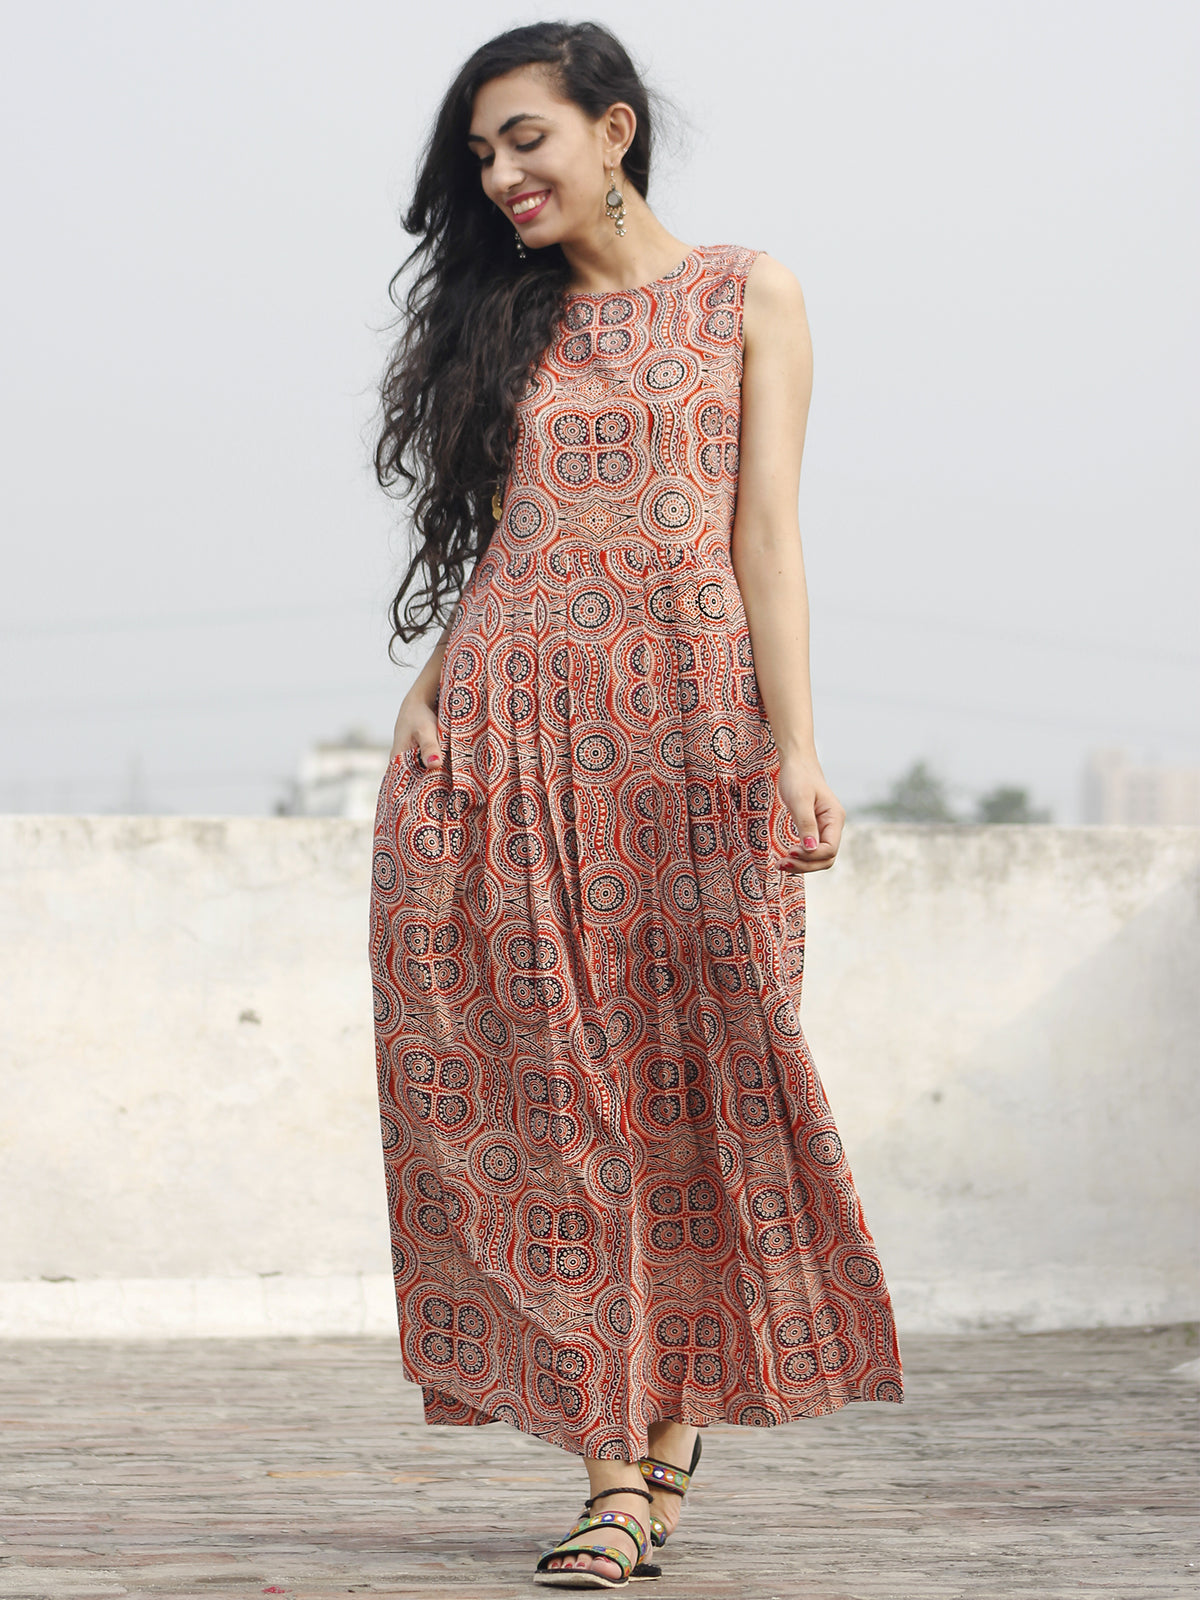 Red Maroon Black Ivory Long Sleeveless Ajrakh Hand Block Printed Cotton Dress With Knife Pleats & Side Pockets - D32F682